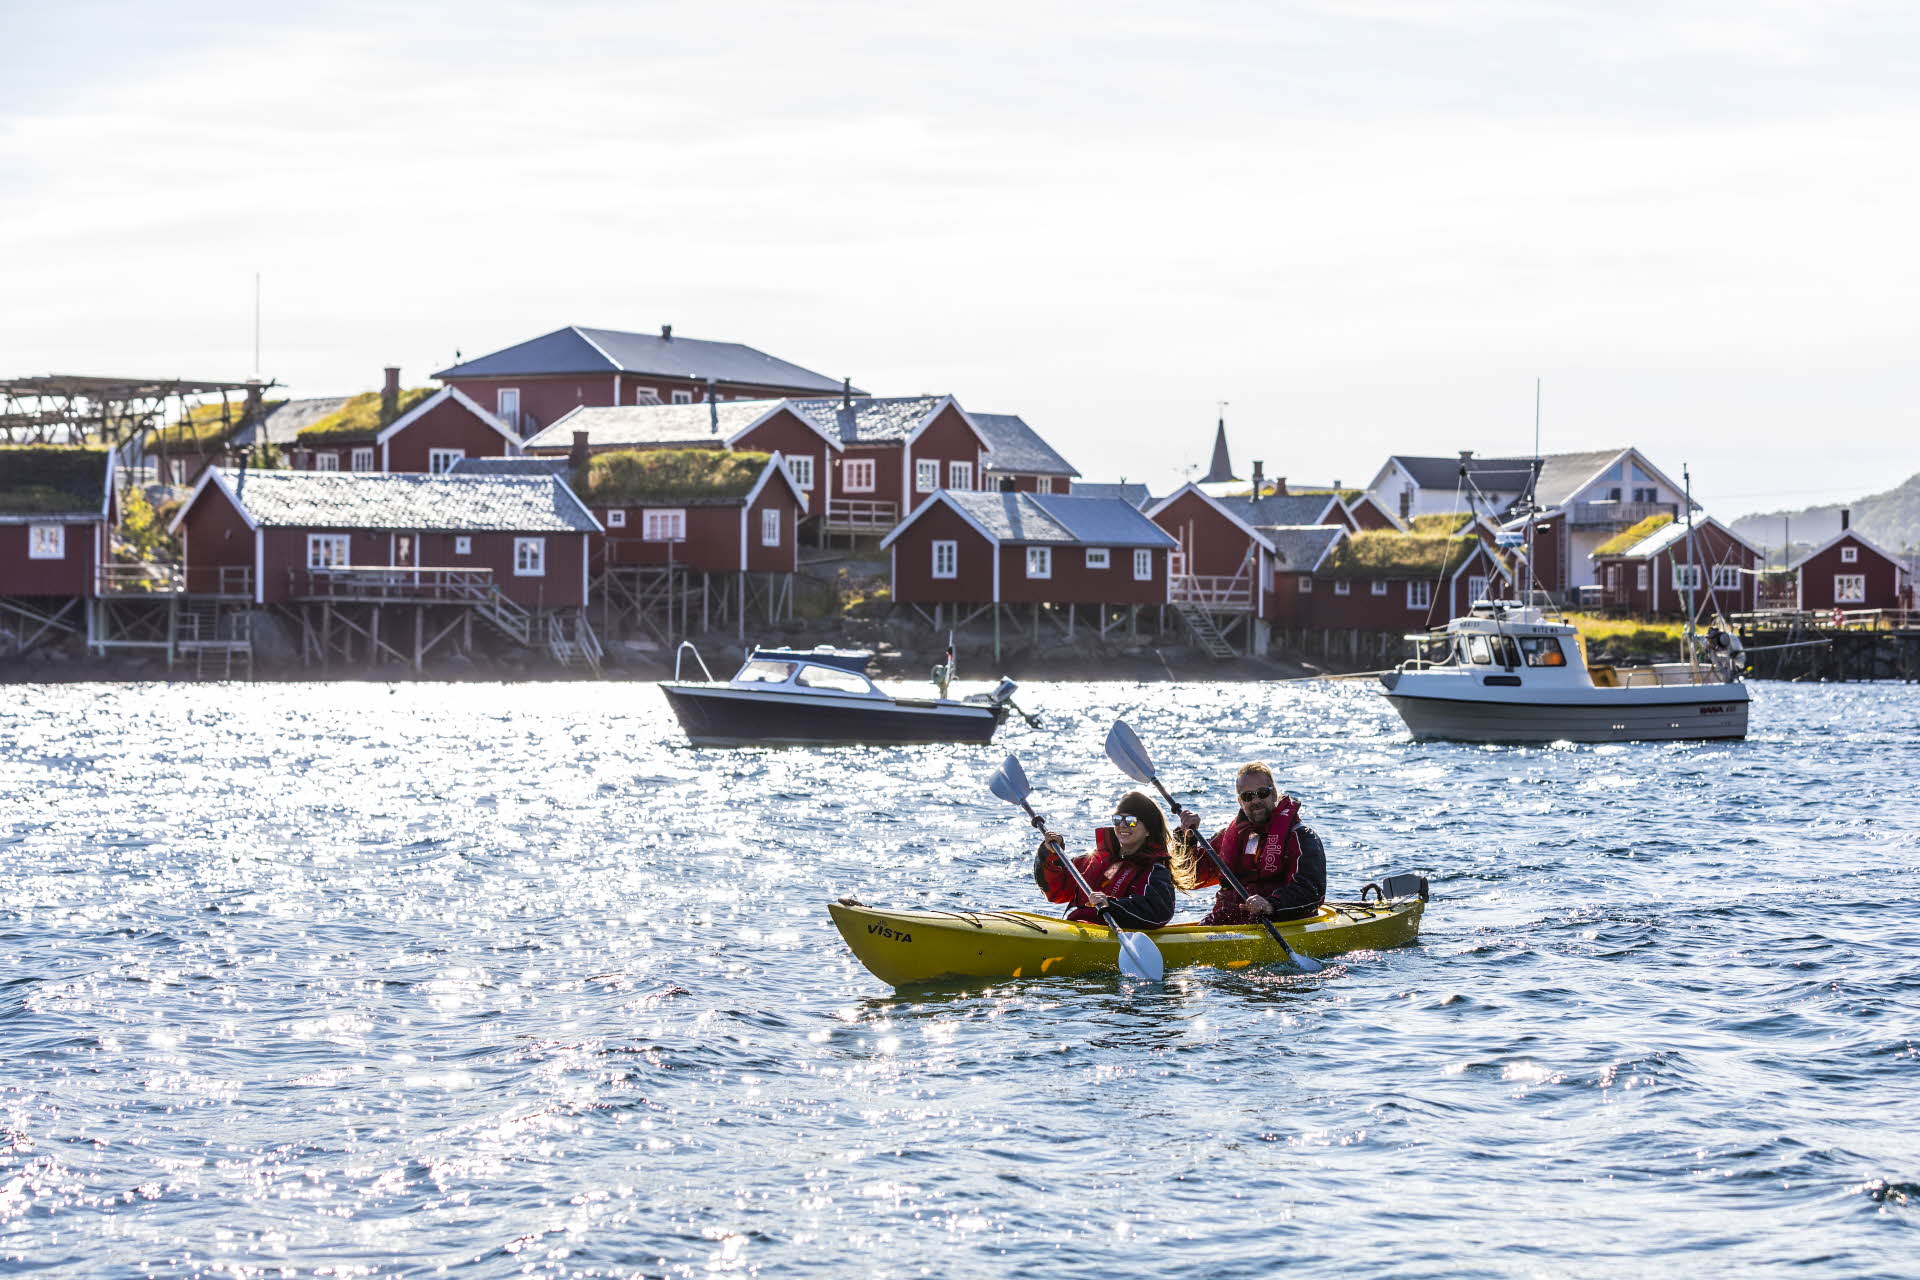 Two people kayaking in front of two small boats and Reine Rorbuer